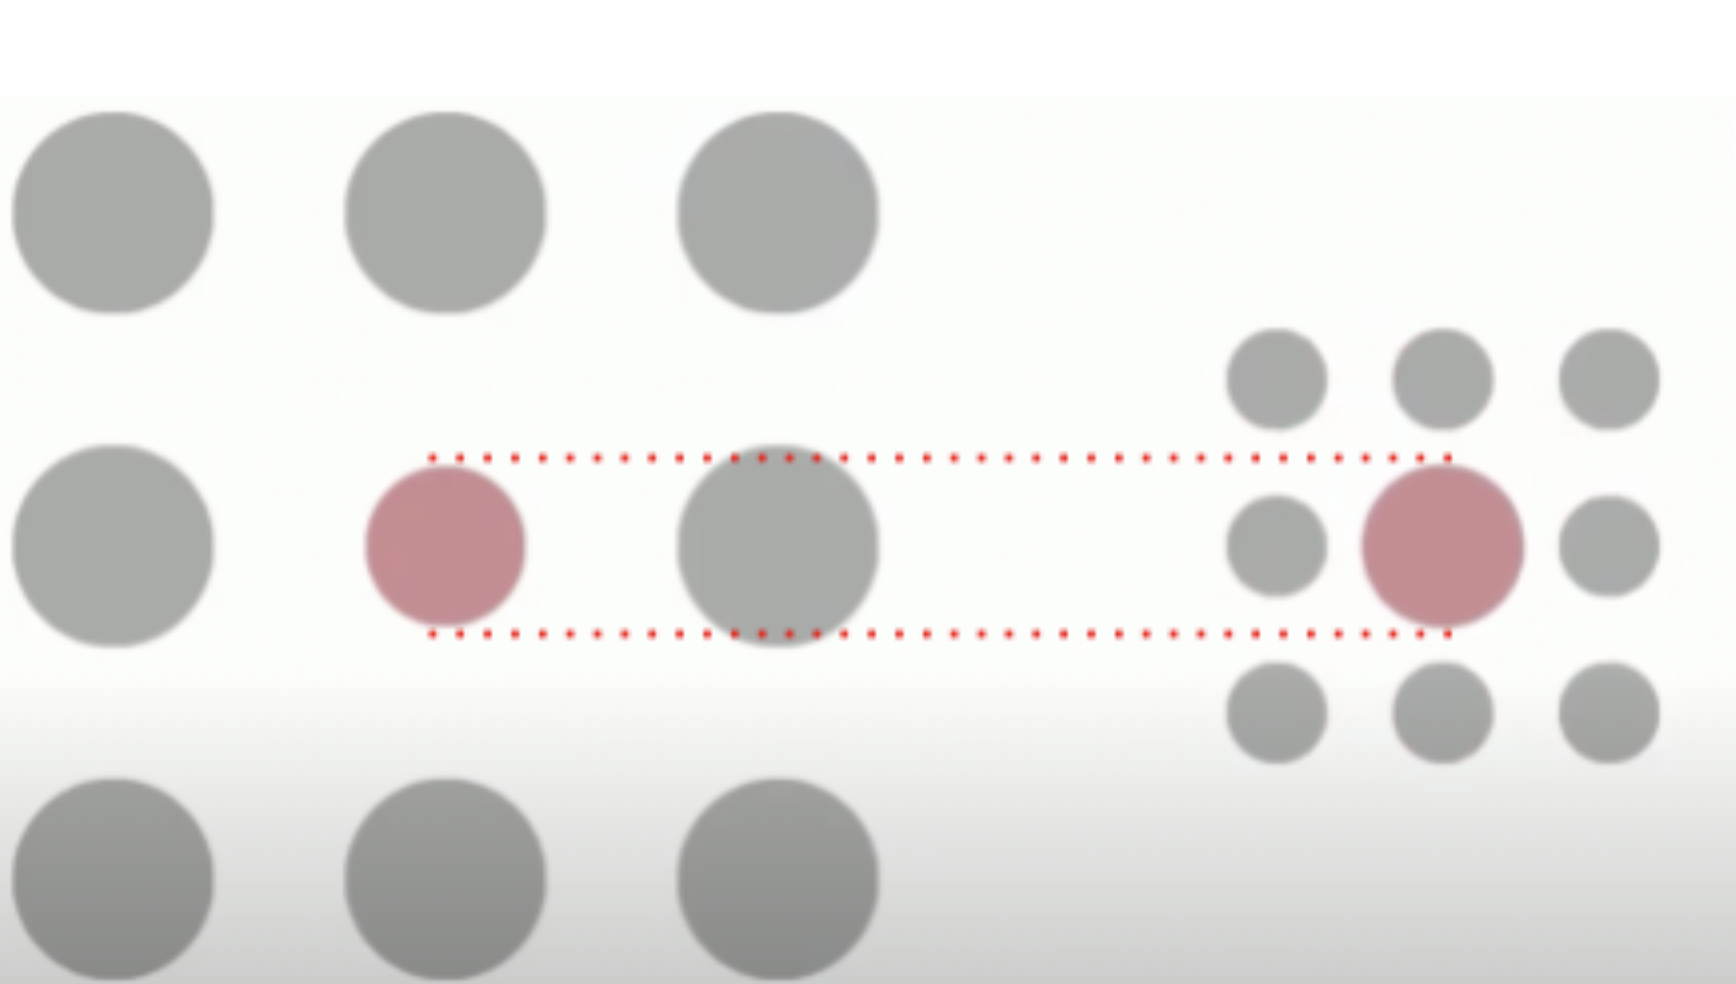 Comparing the size of the target stimuli in the Ebbinghaus Illusion